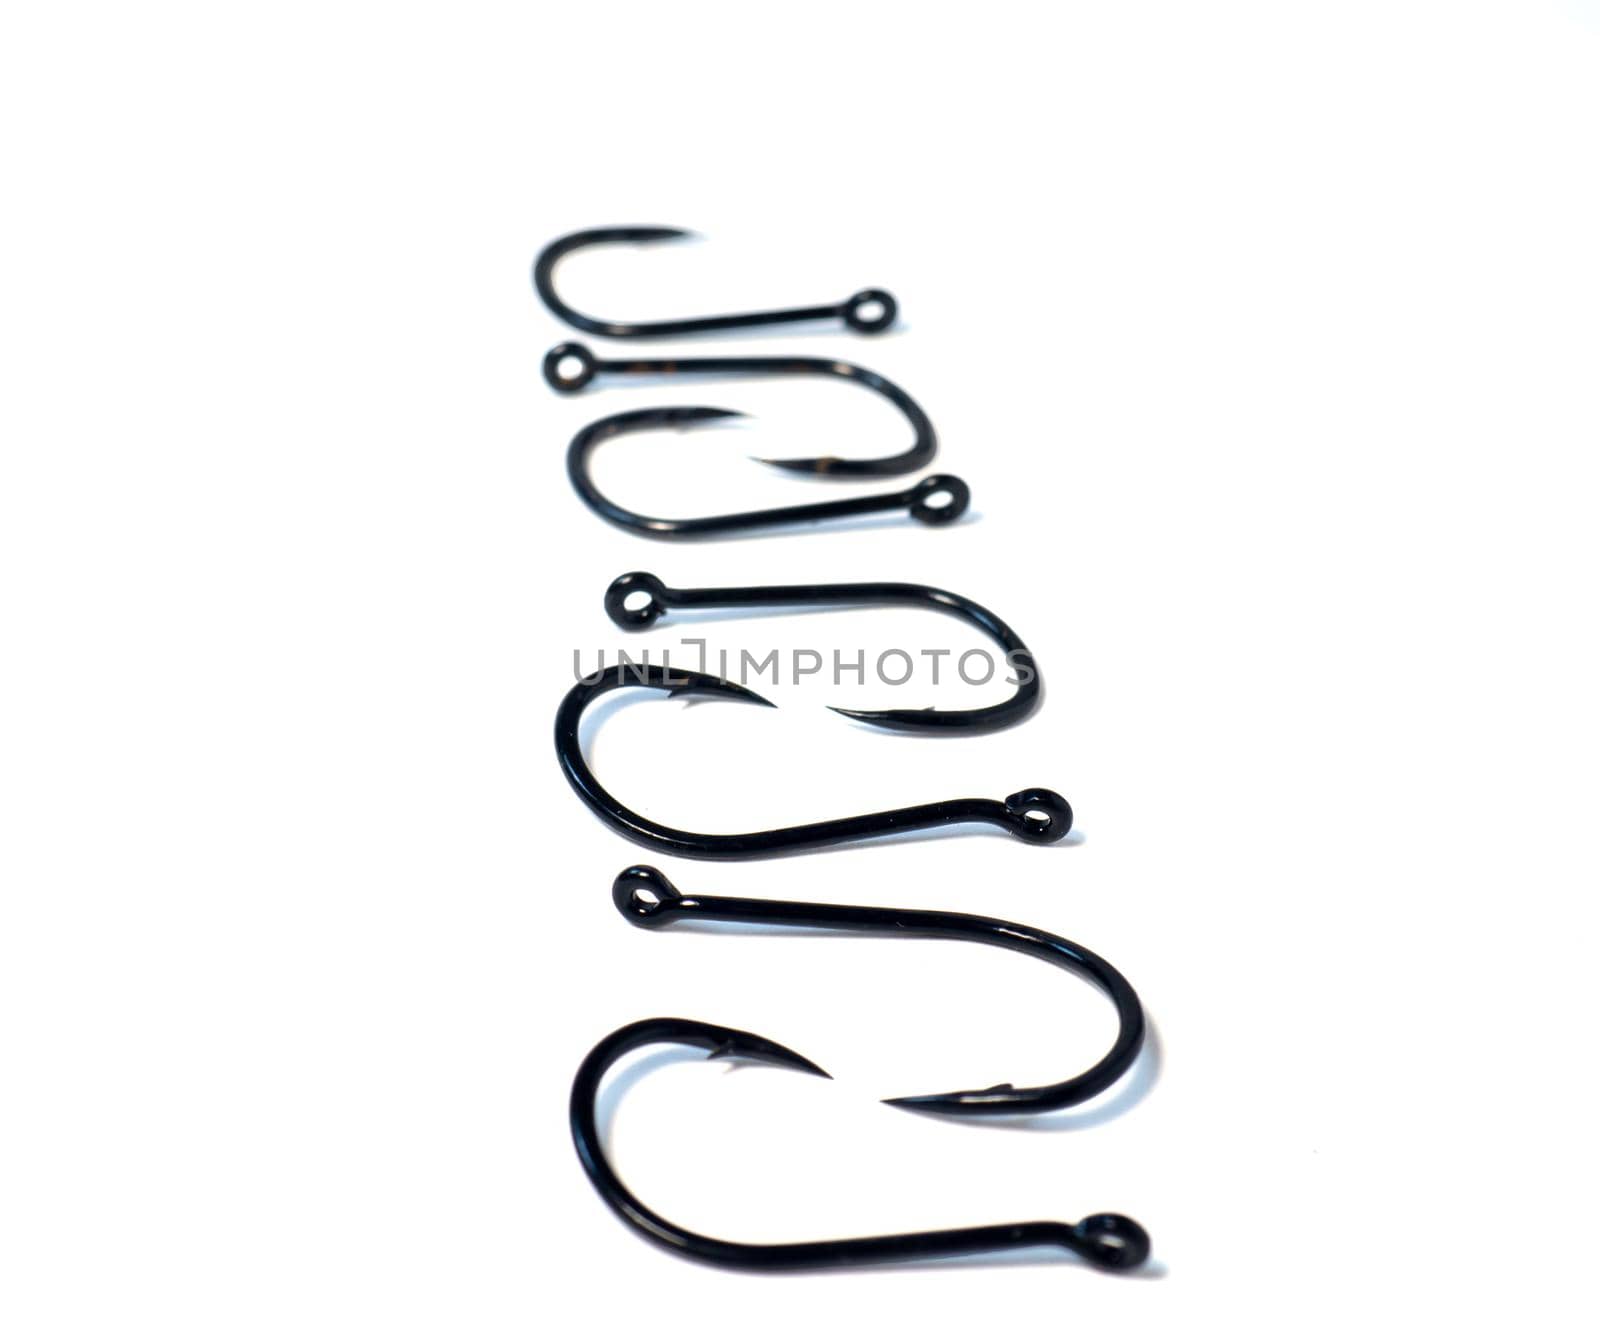 fish hooks for catching carp on a white background by Puludi